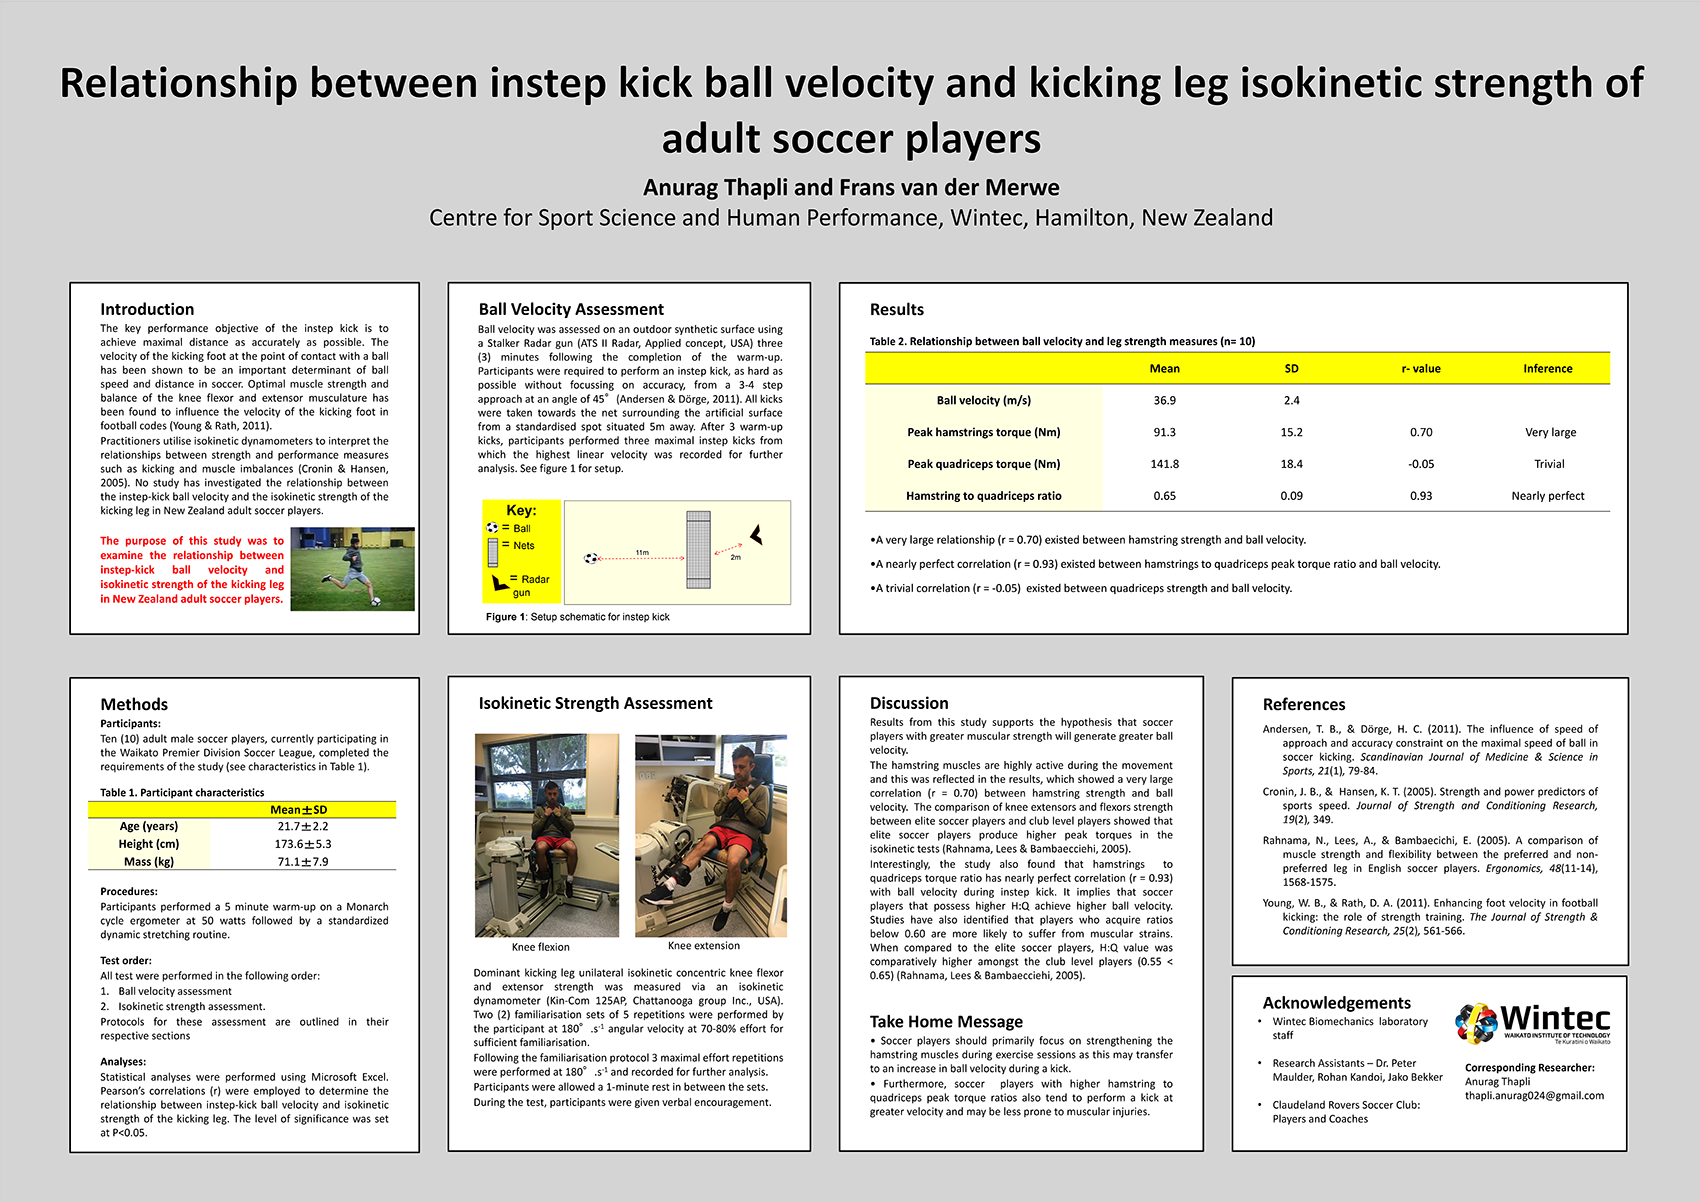 Relationship between instep kick ball velocity and kicking leg isokinetic strength of adult soccer players